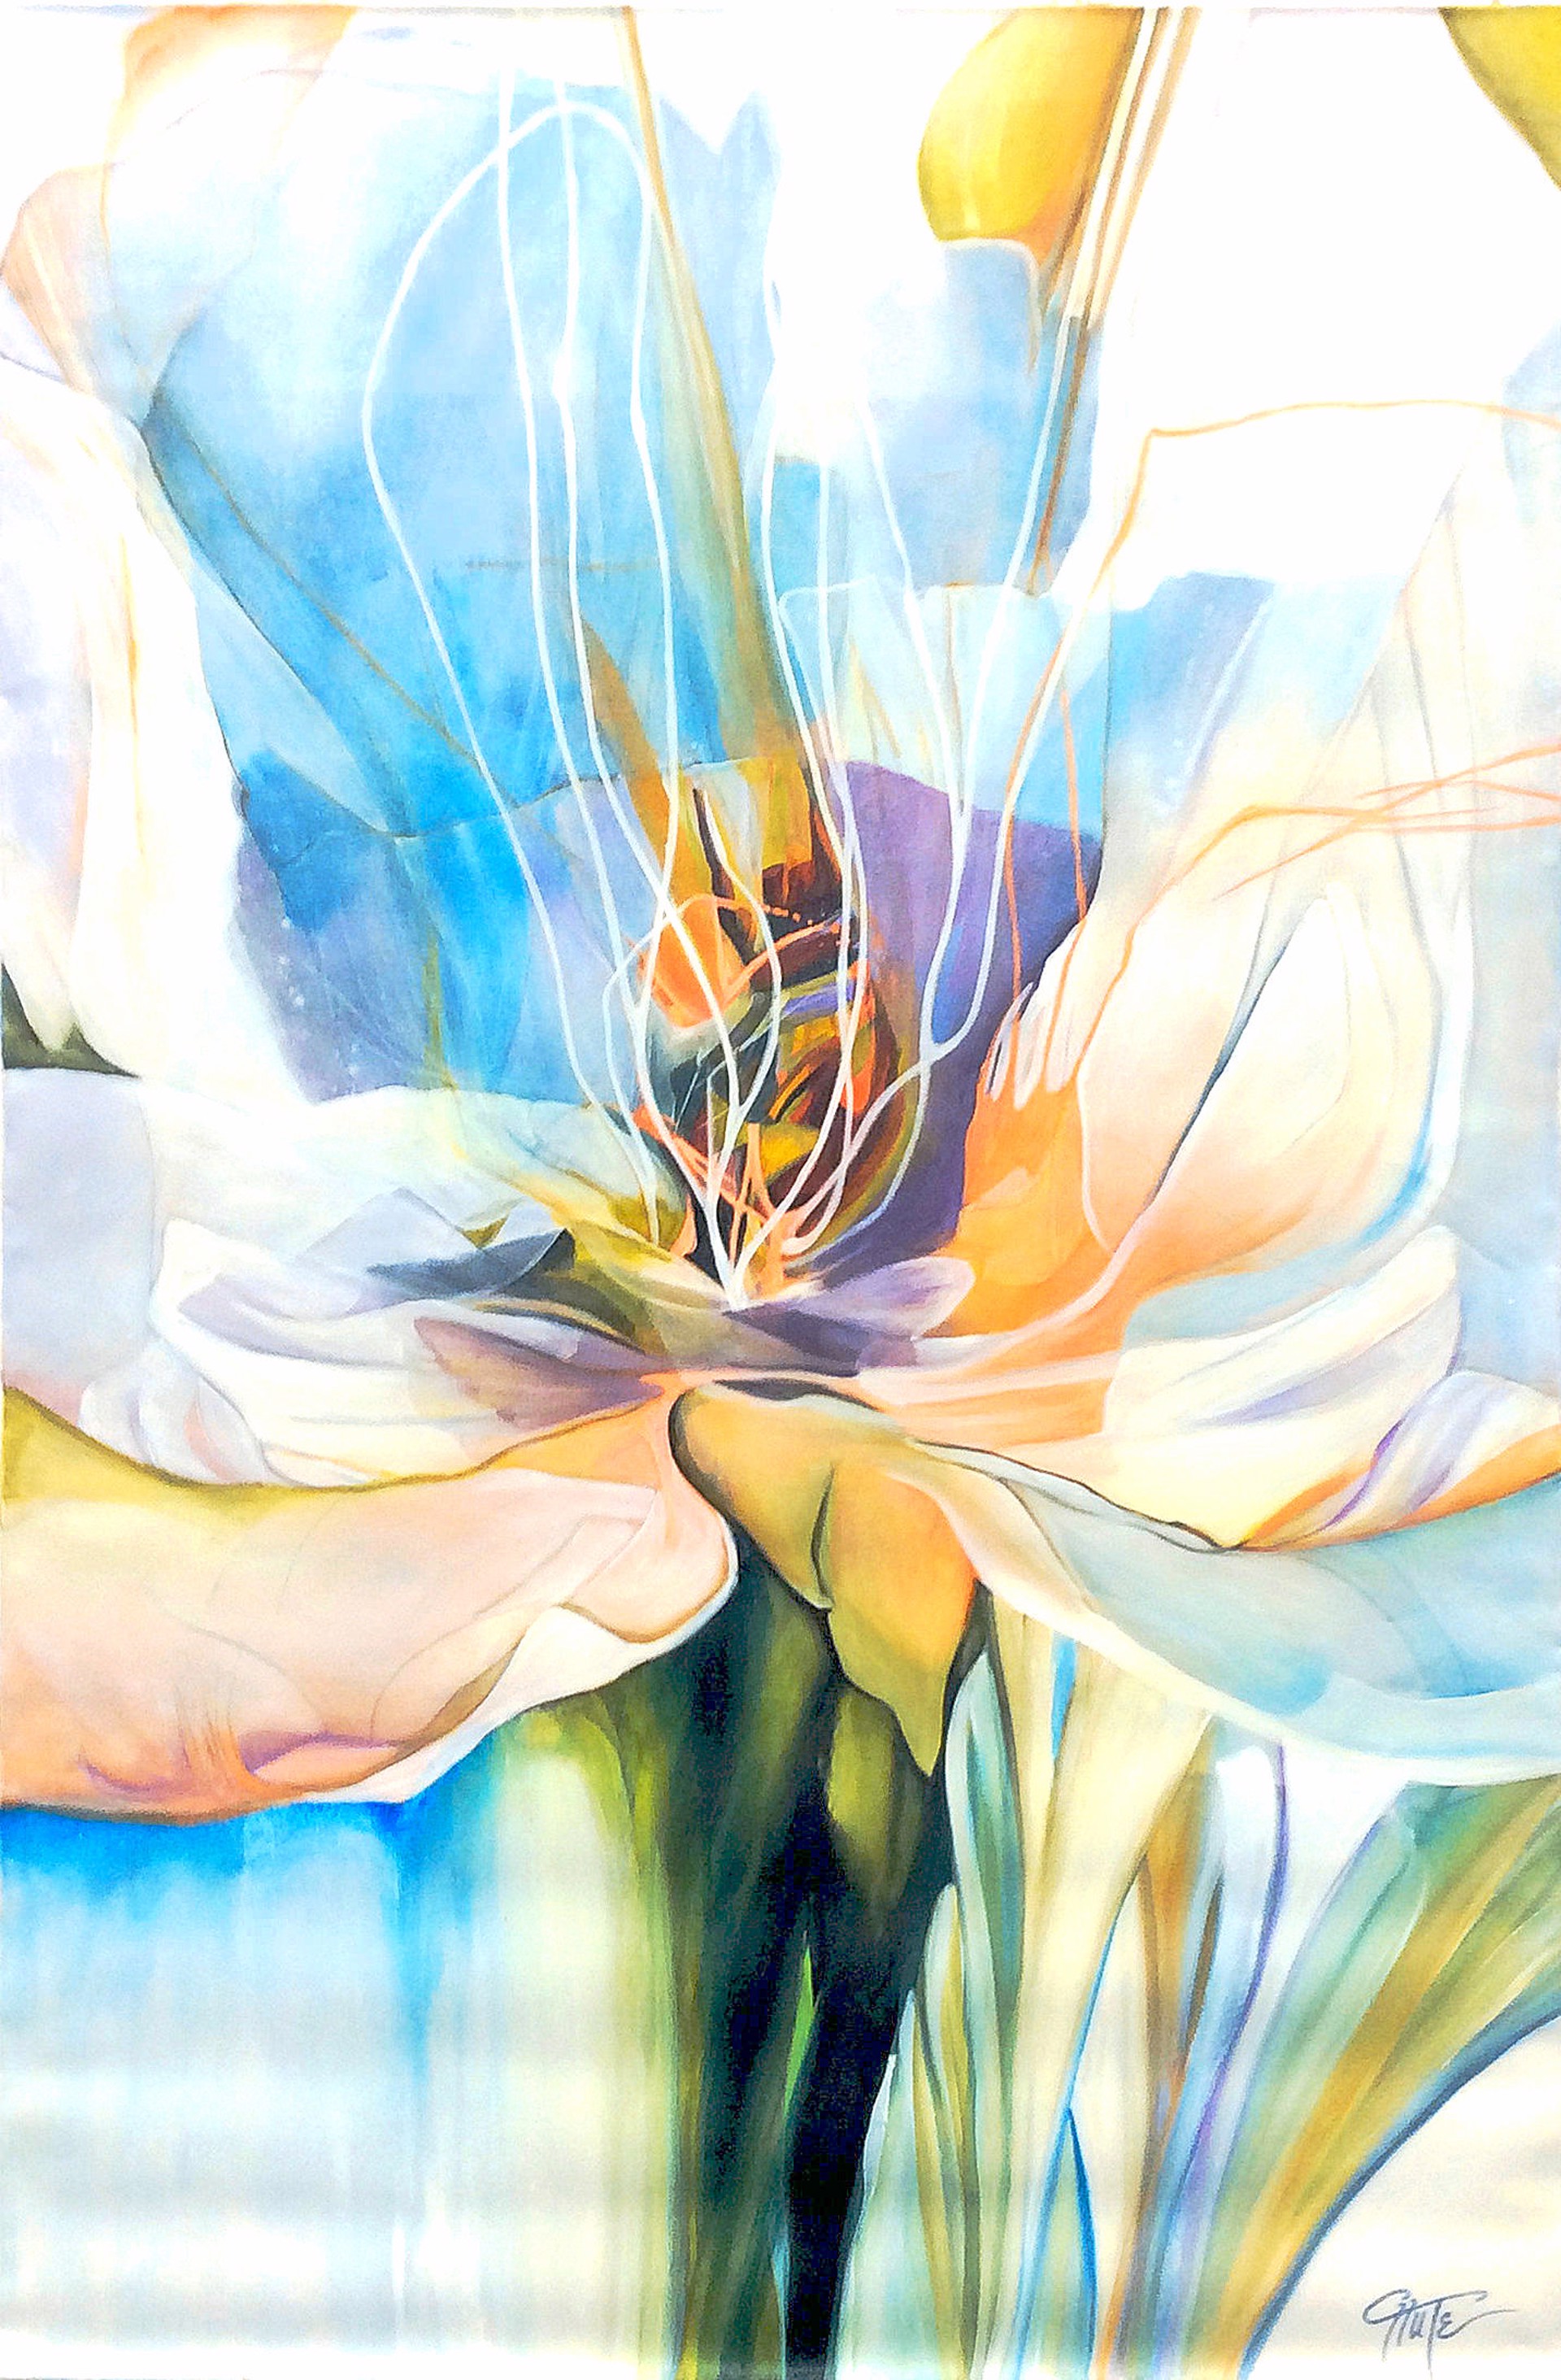 "Petal Abstract" by Patricia Chute